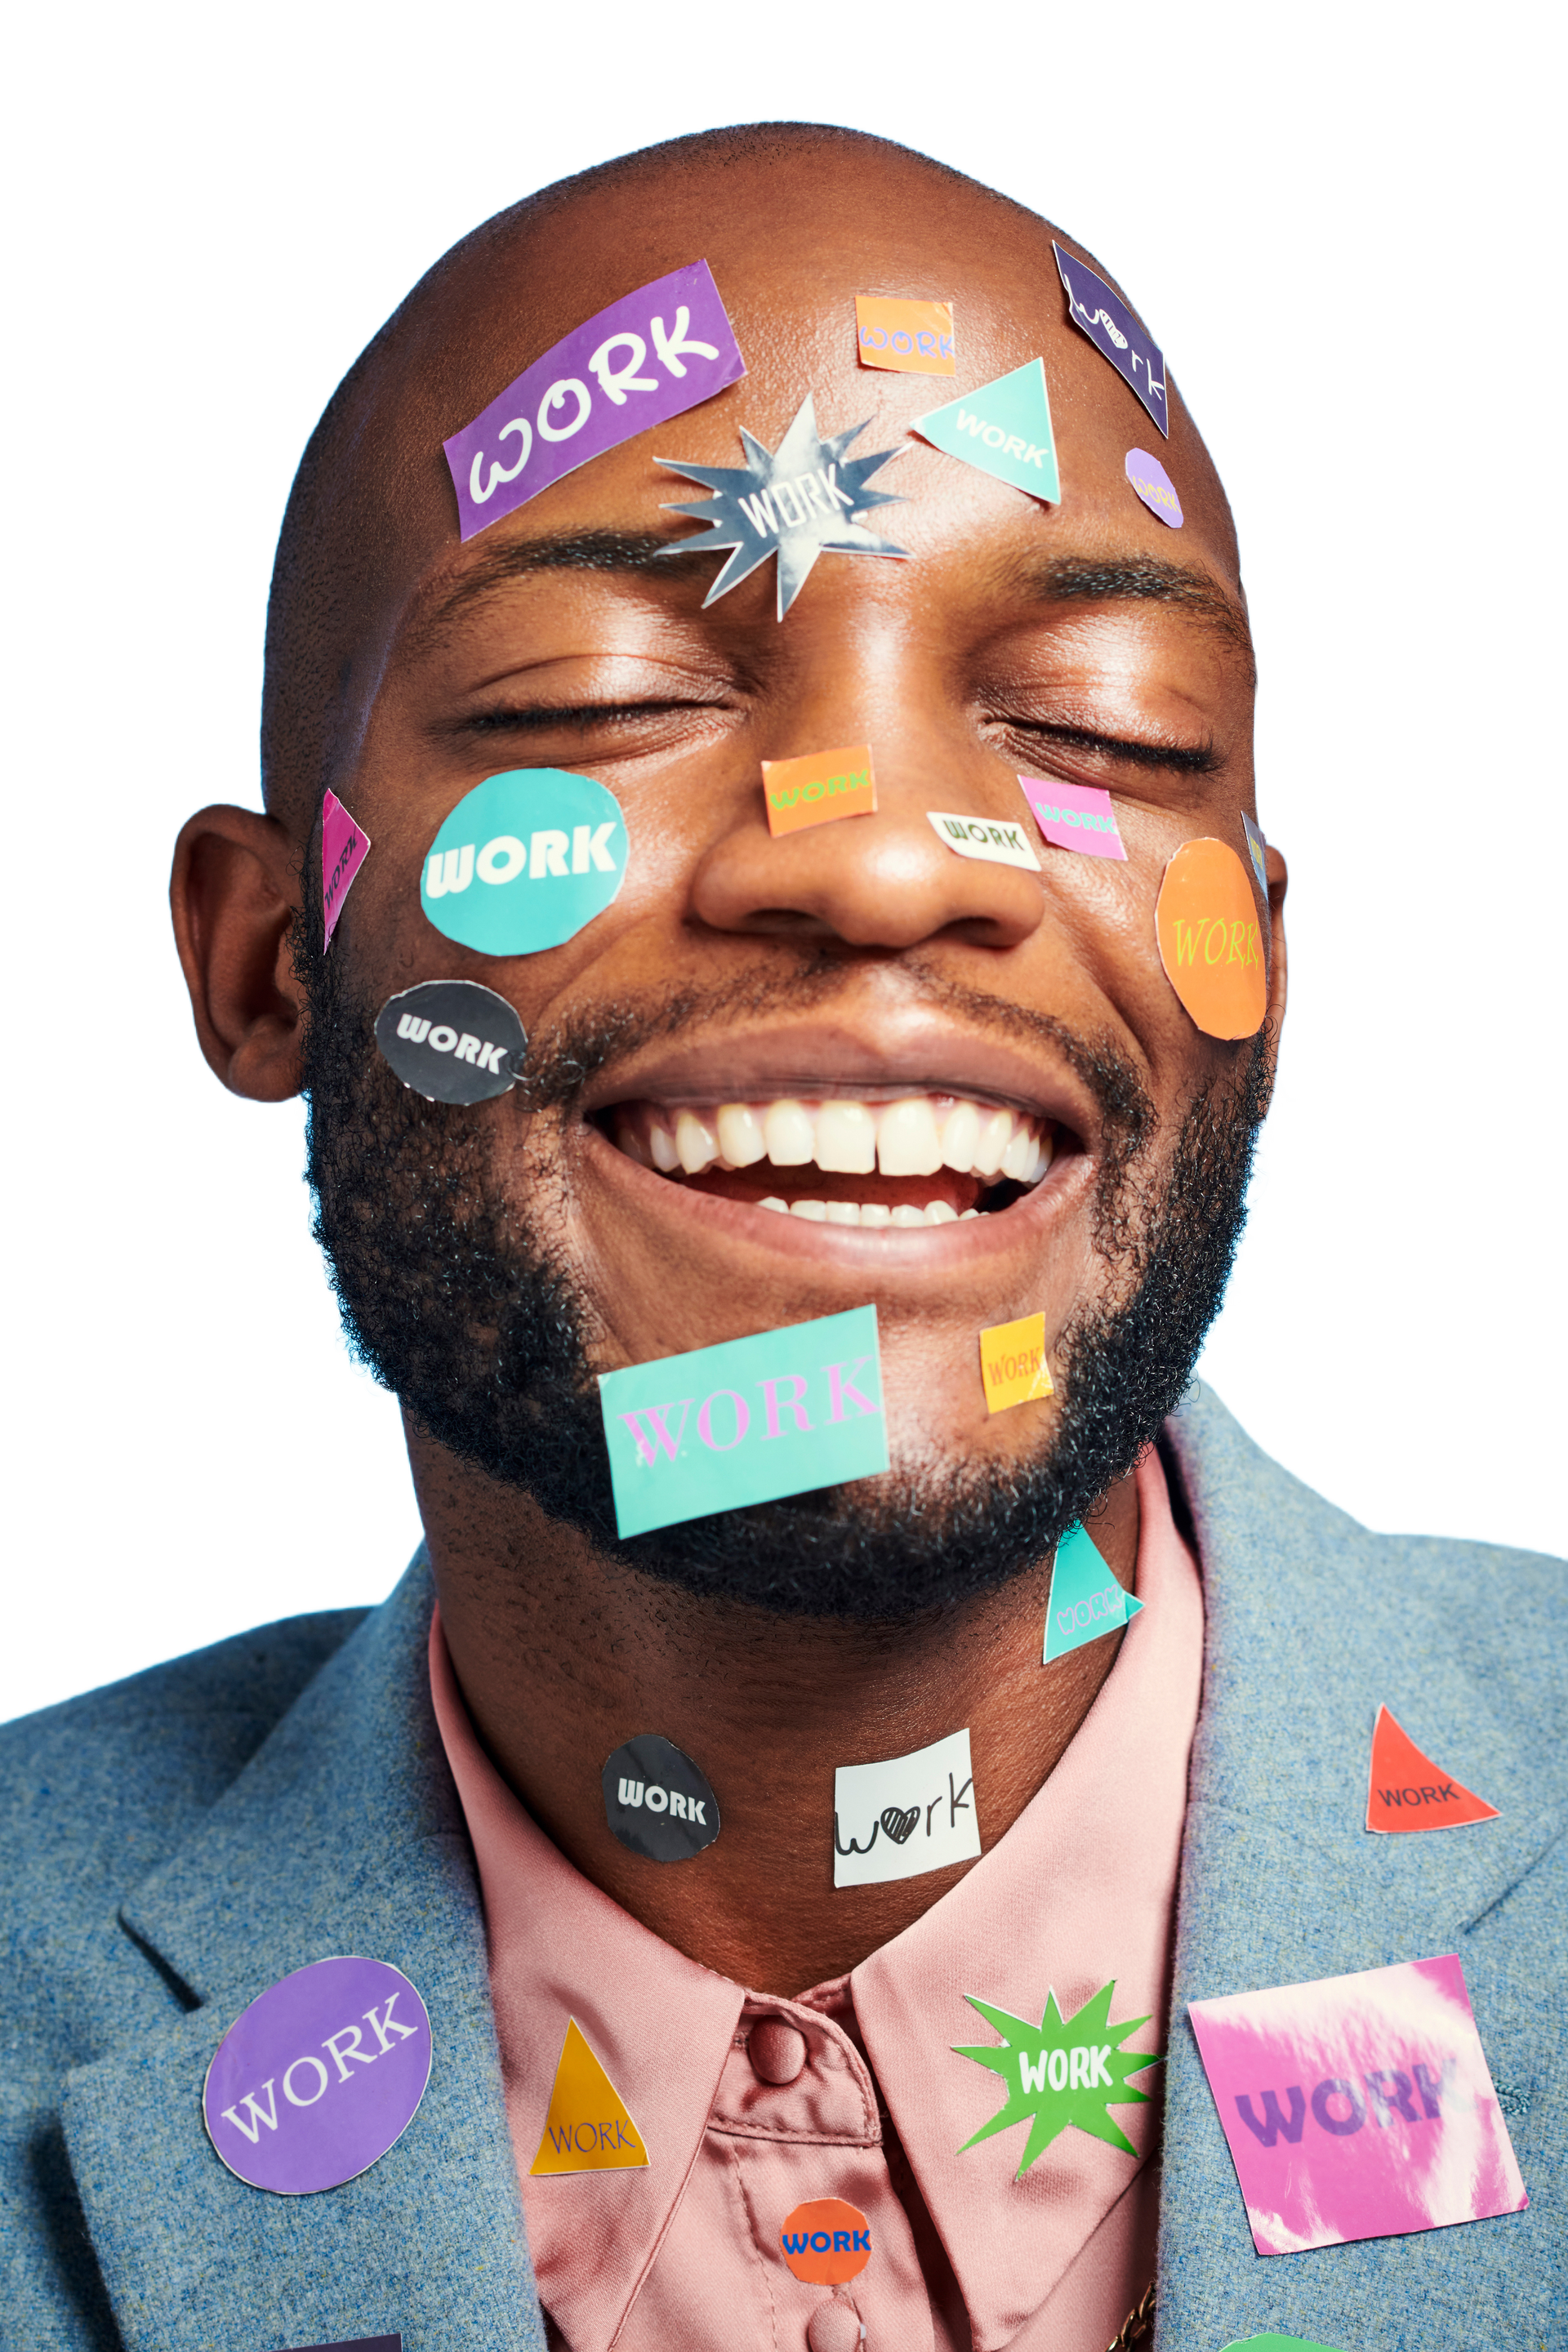 This guy's face is covered in sticky notes and he looks so happy with ConsultSmart LLC web design.